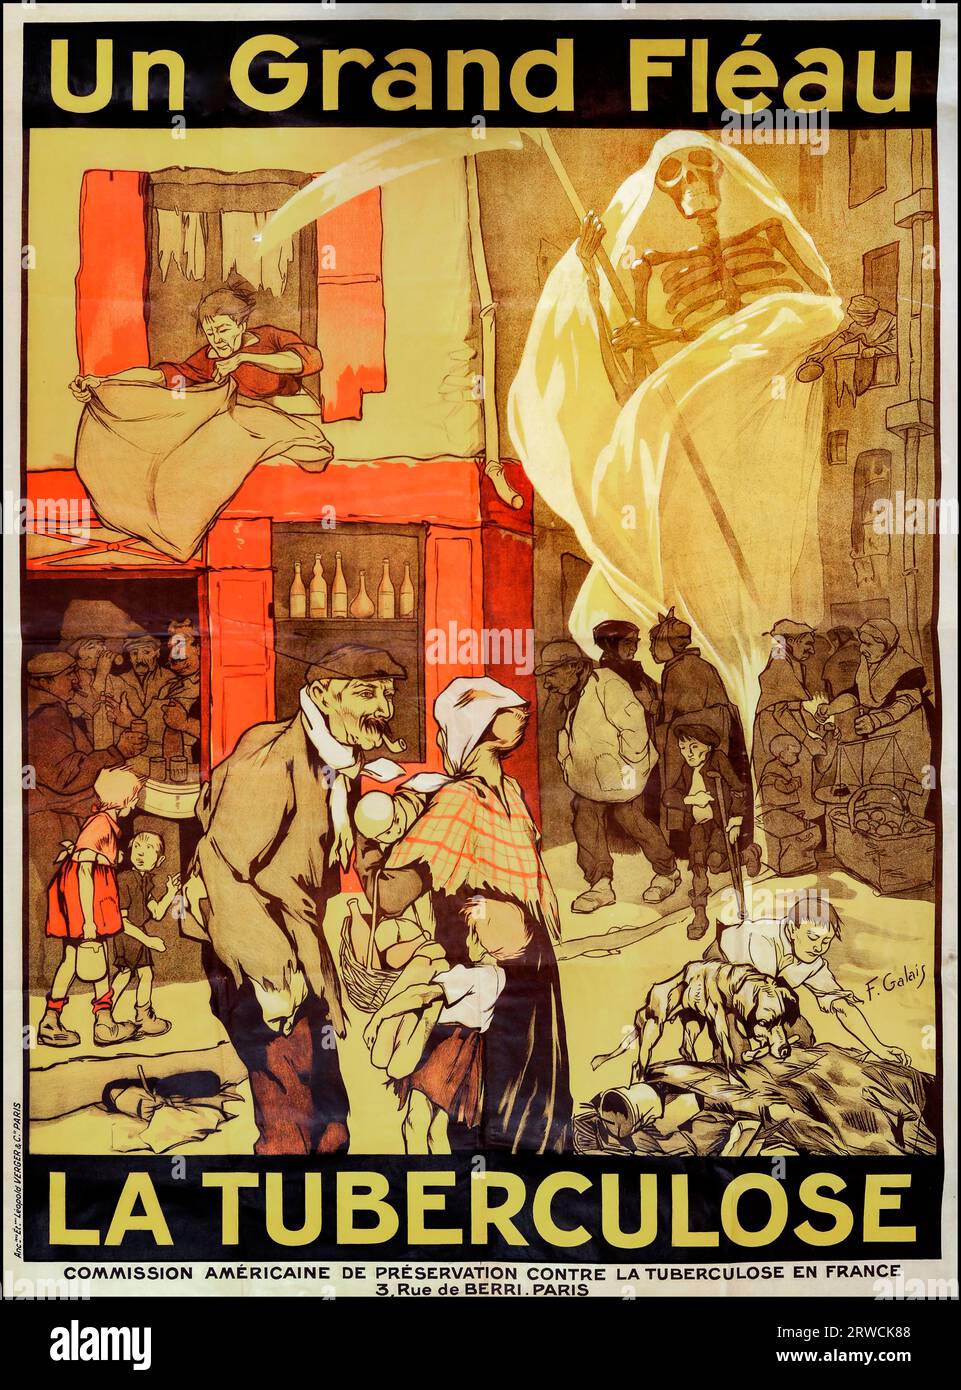 Un Grand Fleau La Tuberculose 1900s French health propaganda poster - Tuberculosis A Great Plague / Un Grand Fleau La Tuberculose - featuring an illustration of famished men, women and disabled children in scruffy clothes, a boy and his dog scavaging through rubbish, street sellers in the market, people in the pub, and a large silhouette of grim reaper holding a scythe in its bony hands. Issued by American Tuberculosis Preservation Commission in France / Commission Americaine de Preservation Contre la Tuberculose en France. Printed by Leopold Verger & Cie, Paris. c1917 Stock Photo